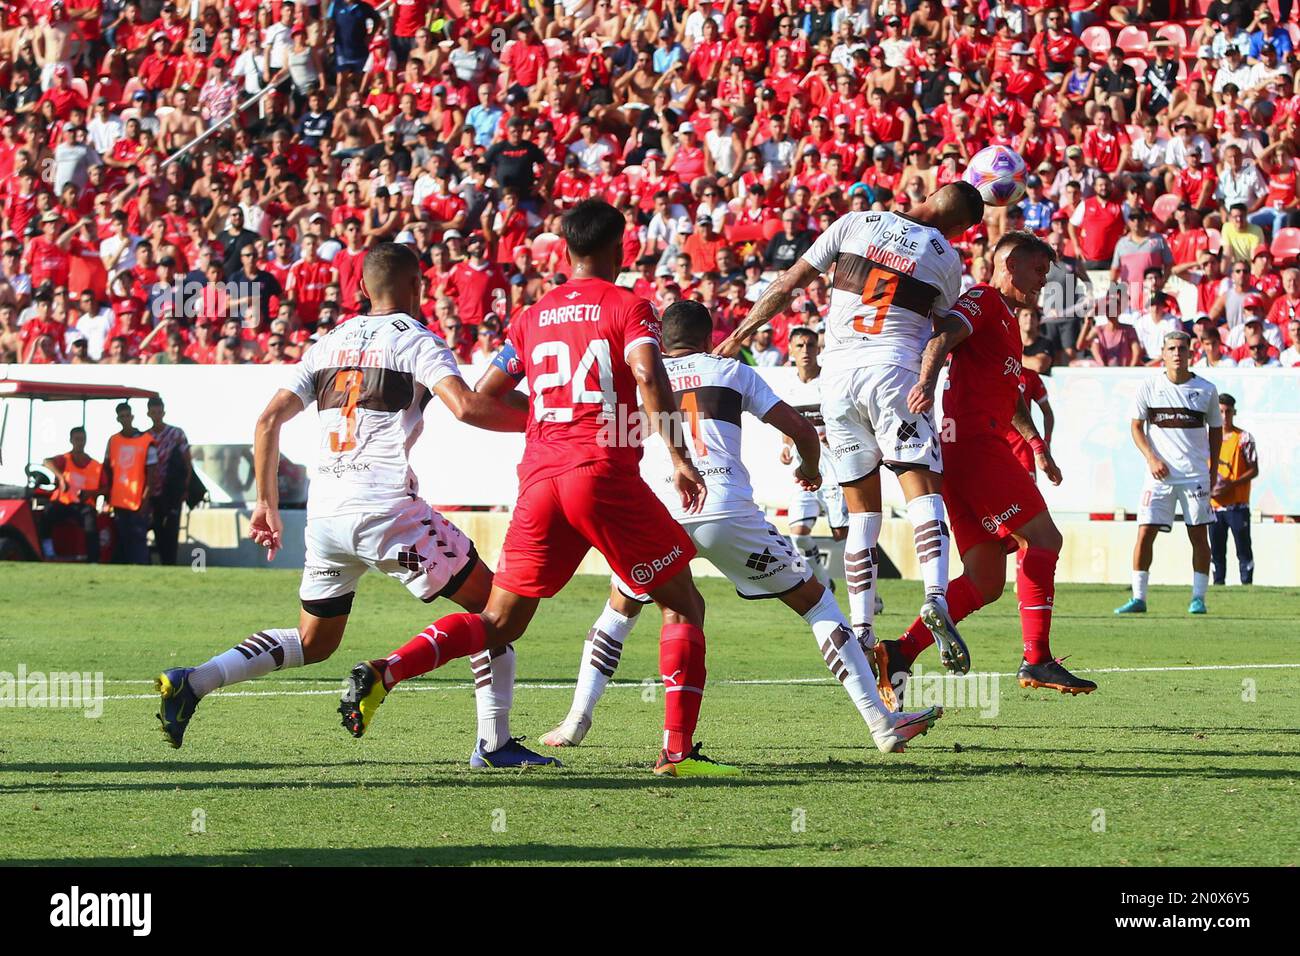 Buenos Aires, Argentina, 5th Feb 2023, of Independiente during a match for the 2nd round of Argentina´s Liga Profesional de Fútbol Binance Cup at Libertadores Stadium (Photo: Néstor J. Beremblum) Credit: Néstor J. Beremblum/Alamy Live News Stock Photo